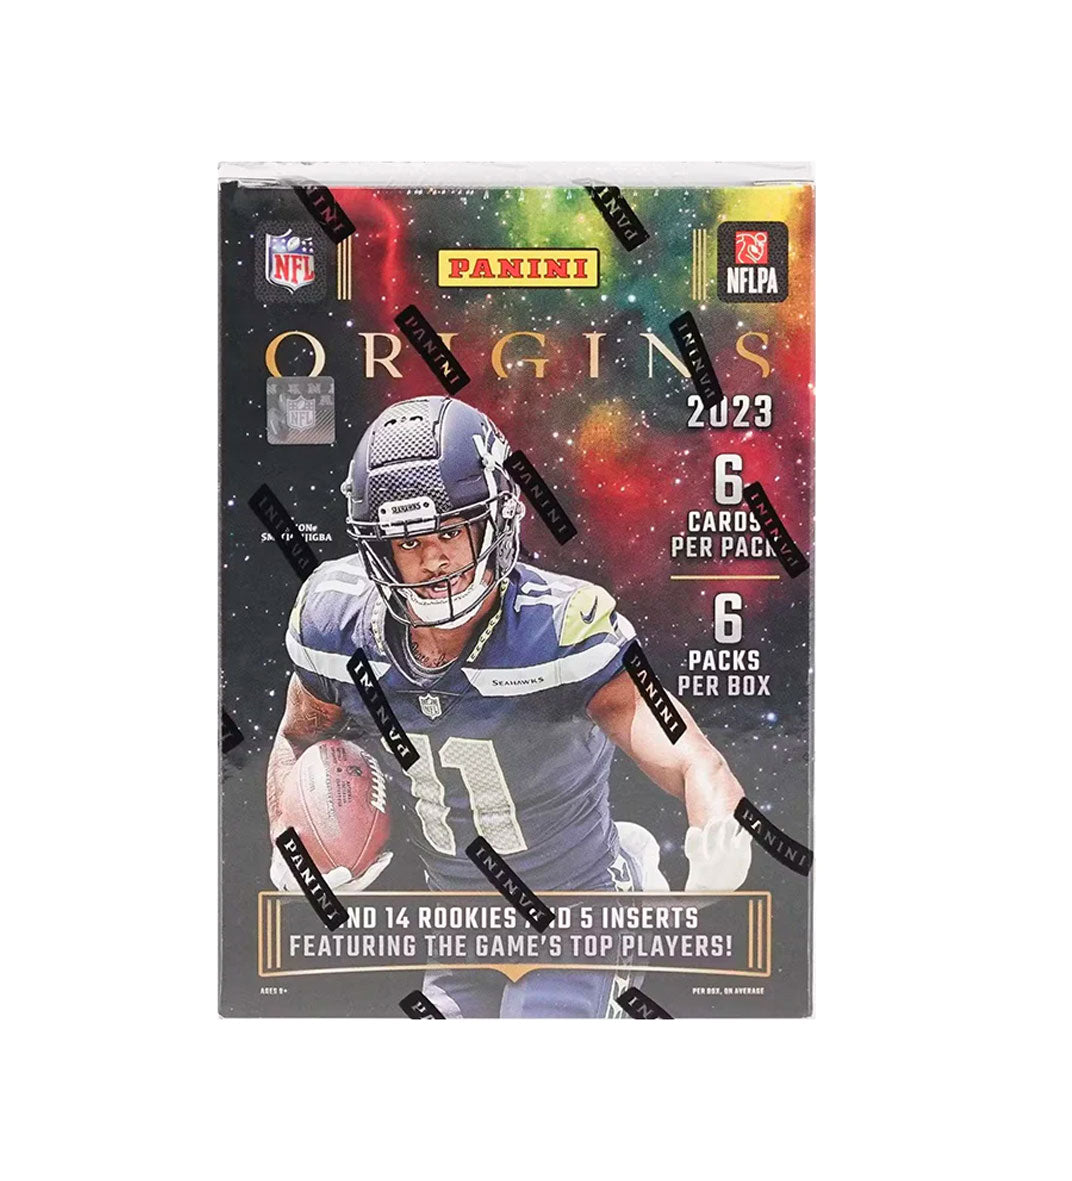 This 2023 Panini Origins Football International Blaster Box is an exciting way to start your collection. The blaster box contains 6 packs full of 6 cards each - with a chance of finding high-value rookie cards or exclusive inserts! Don't miss your chance to become part of football history.